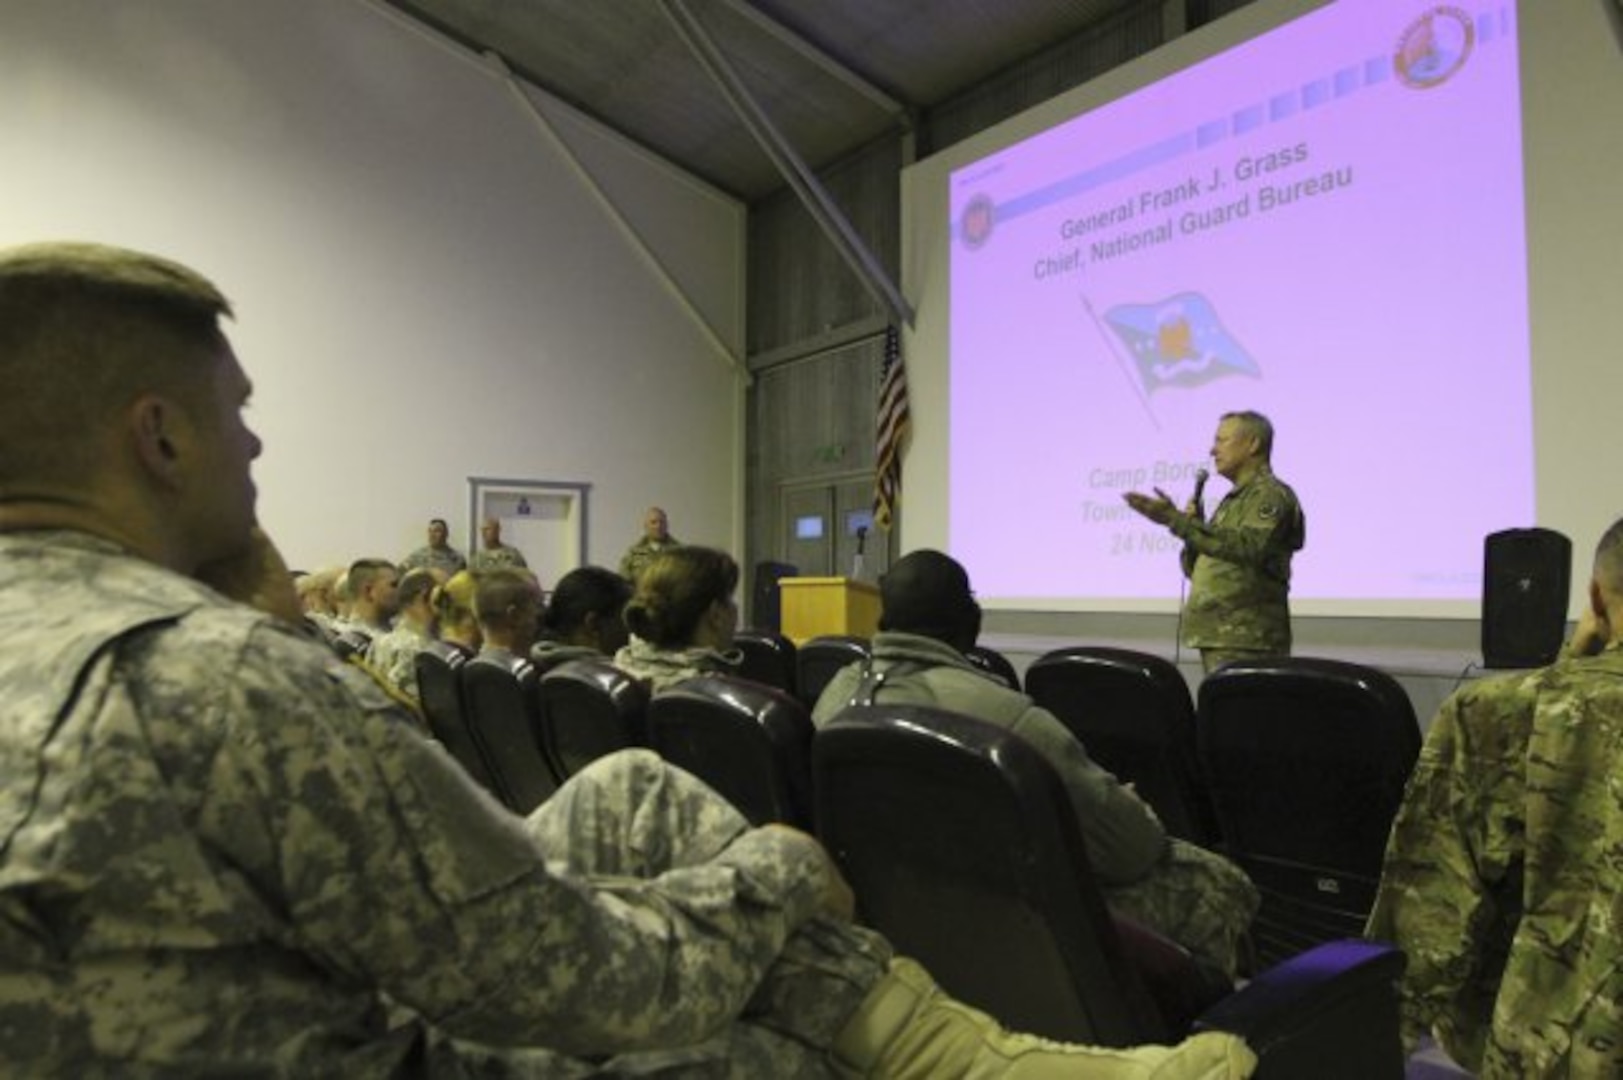 U.S. Army Gen. Frank J. Grass, chief of the National Guard Bureau, introduces himself to an audience of more than 200 reserve-component Service members during a town hall event at Camp Bondsteel, Kosovo, Nov. 24, 2015.